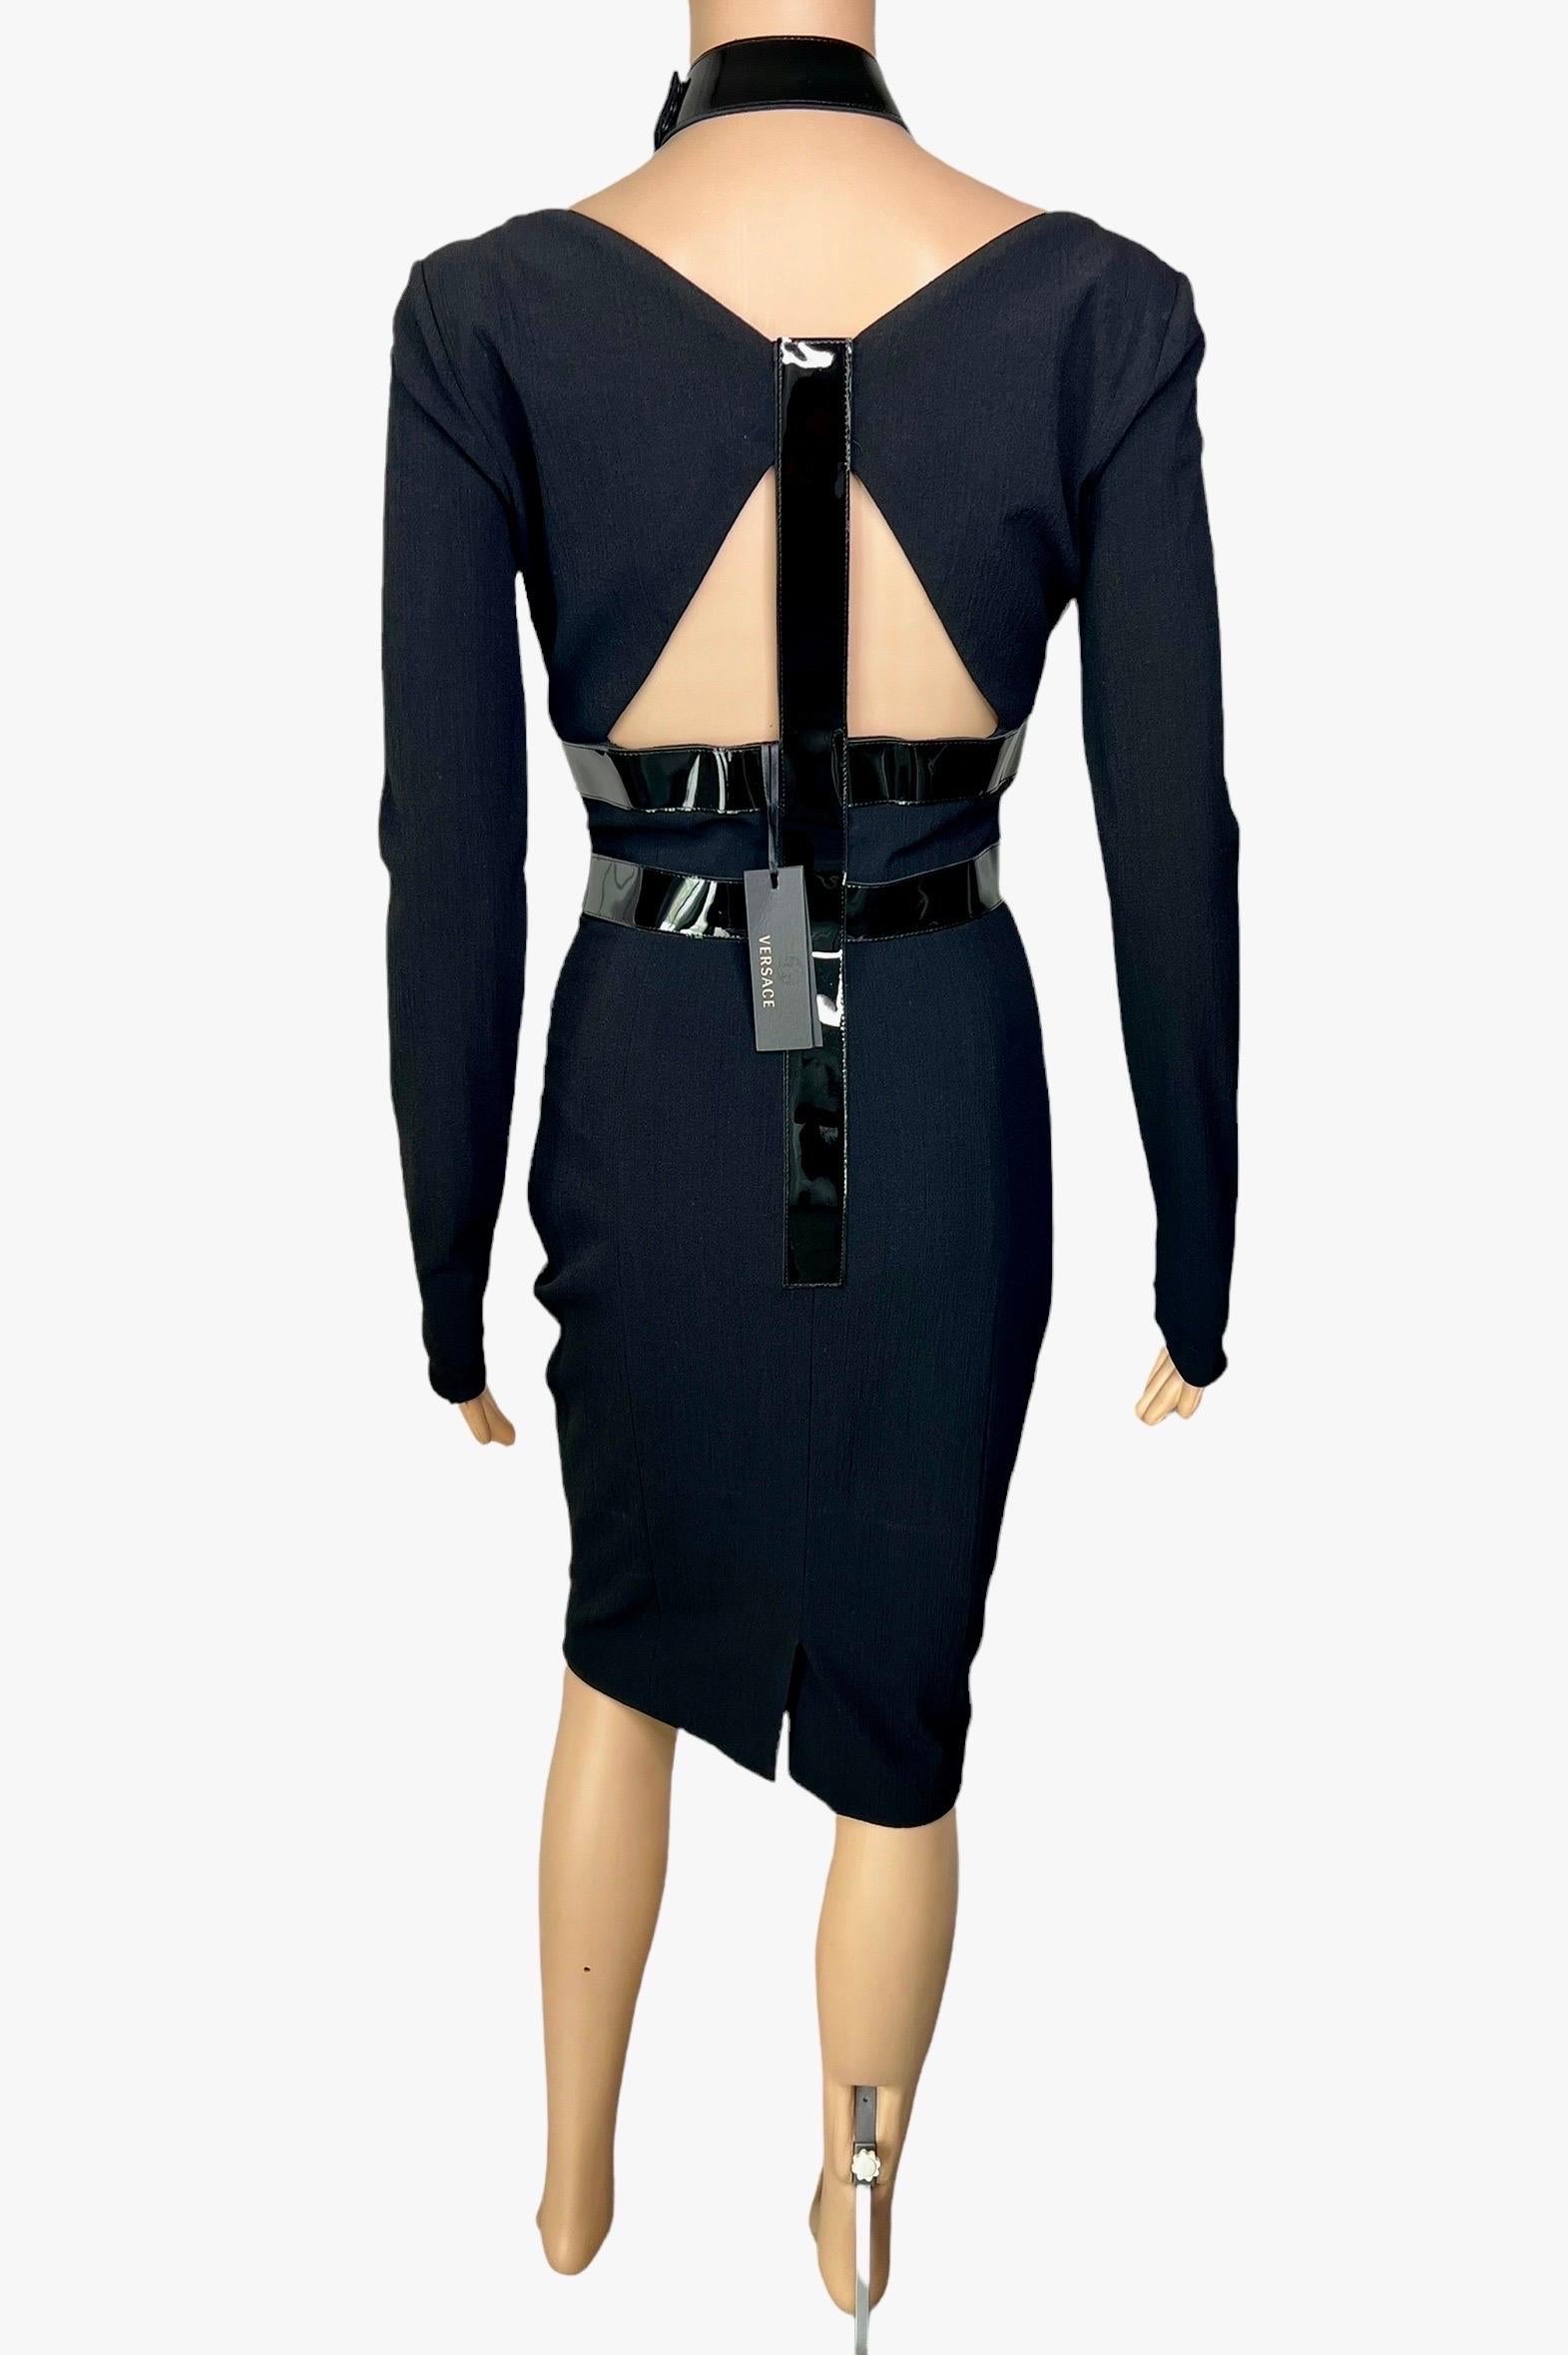 Versace F/W 2013 Bondage Vinyl Collar Plunged Cutout Black Dress In Excellent Condition For Sale In Naples, FL